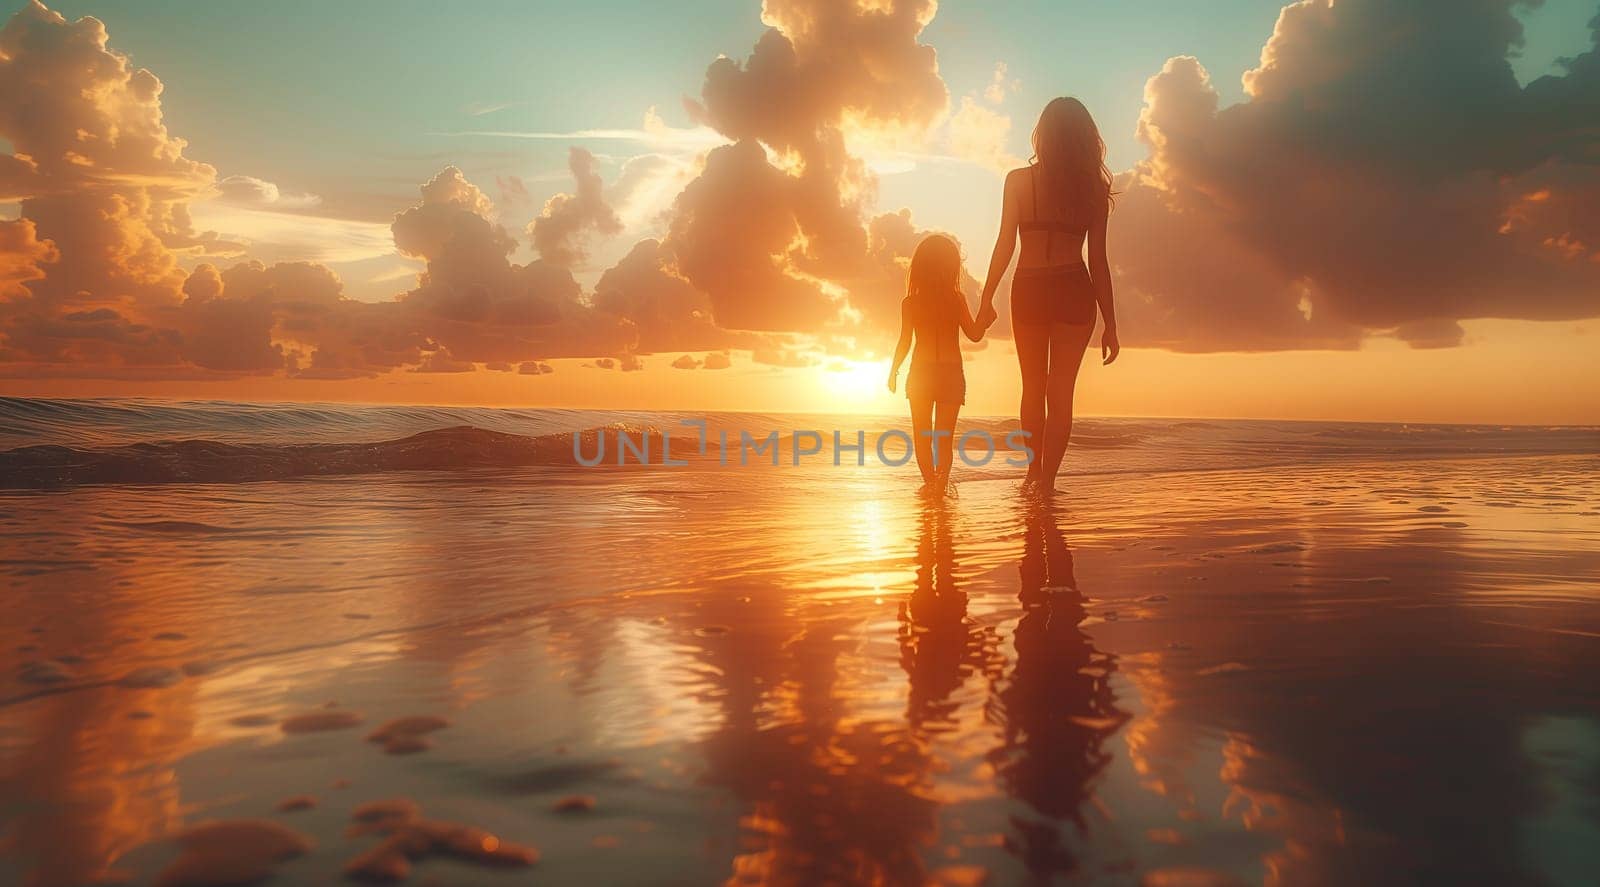 A mother and child walk along the beach under the colorful sky, their hands connected as the sun sets behind them, casting a warm afterglow over the water